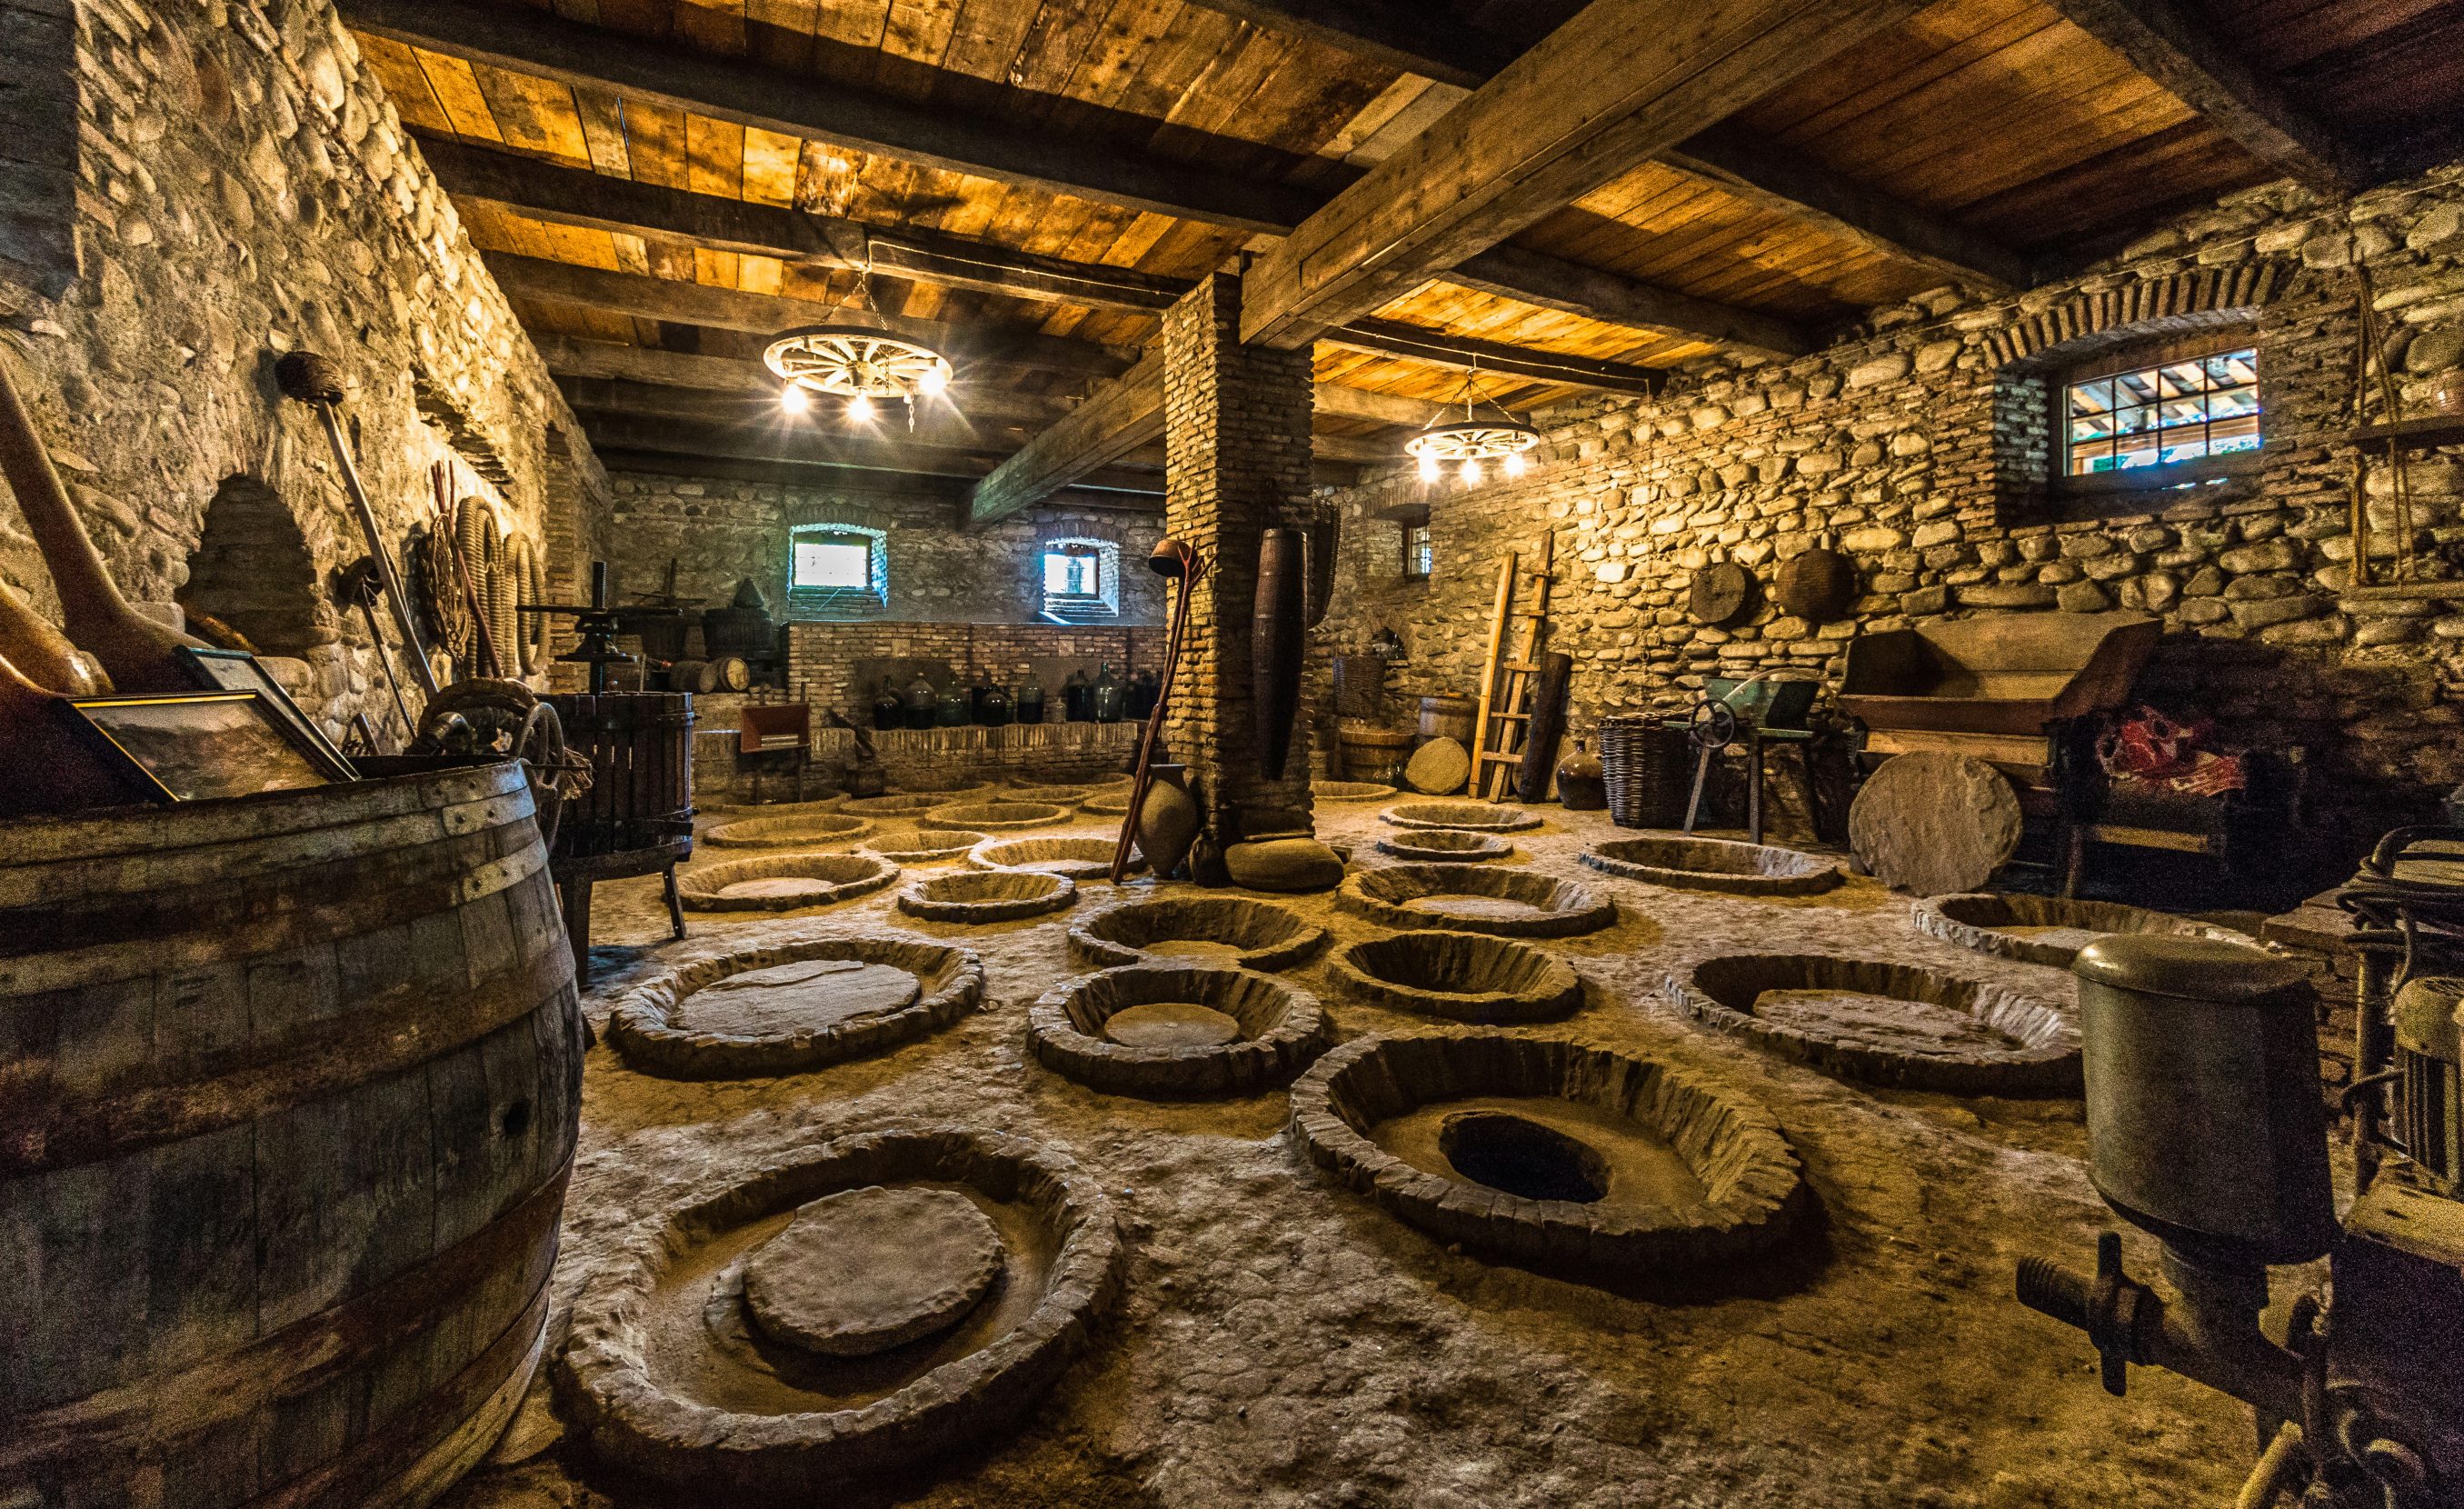 In cellars across Georgia, wine ages the traditional way — buried underground in large clay pots, called qvevri. In the historic village of Velistsikhe, this family-owned wine cellar dates to the 16th century. Photo: Vincent Rowell.